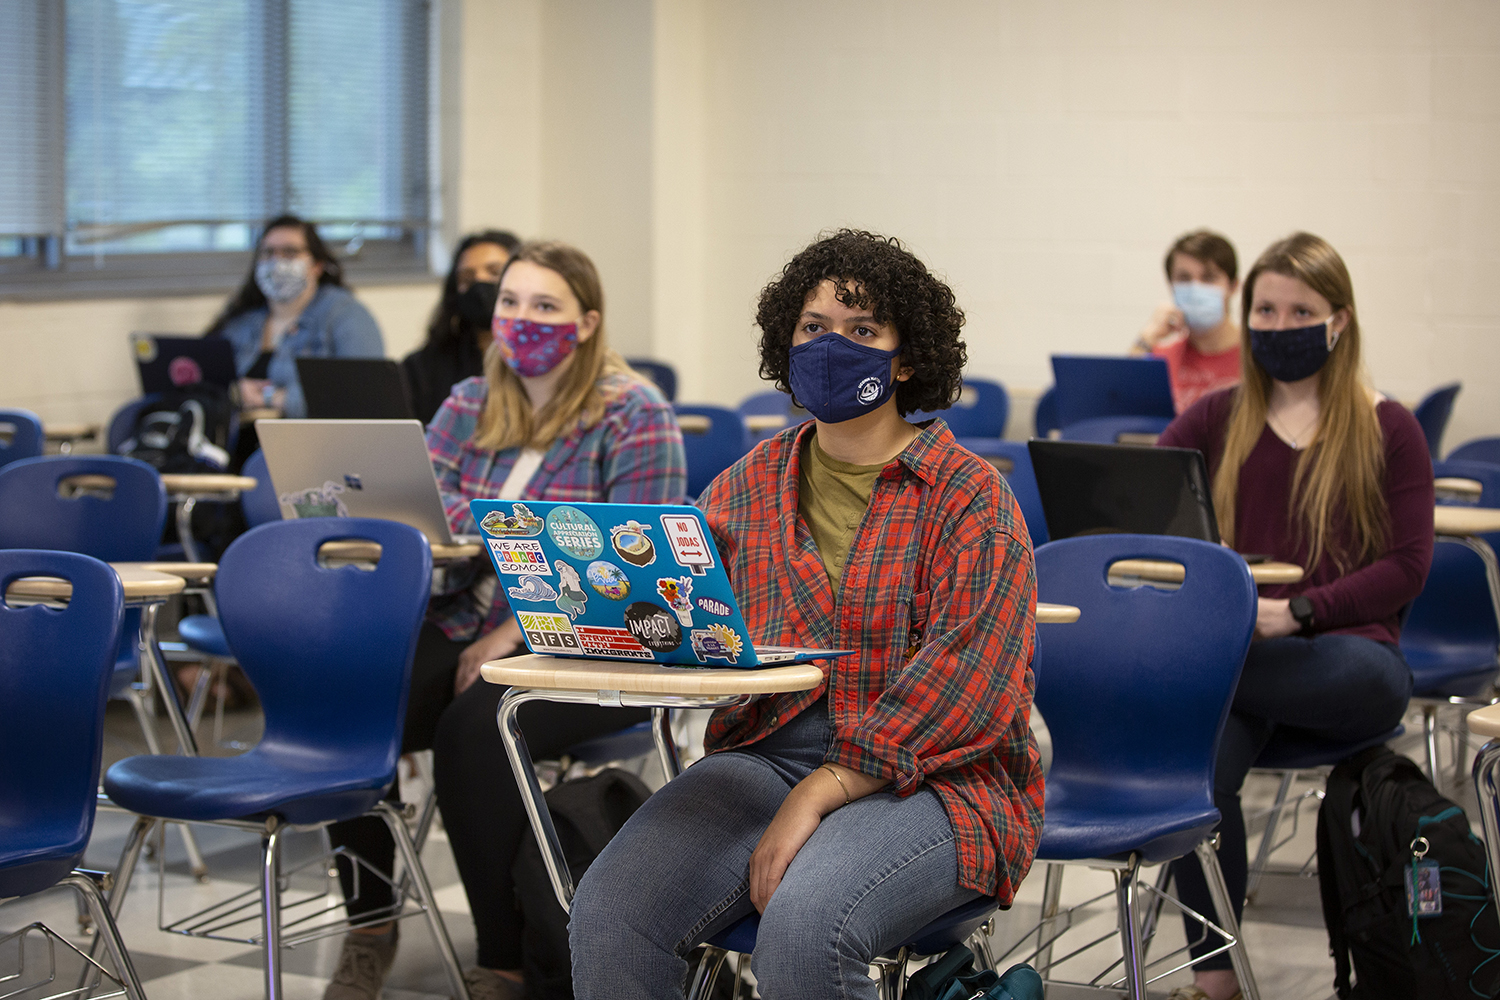 Students wearing face coverings listen to a lecture in a classroom.